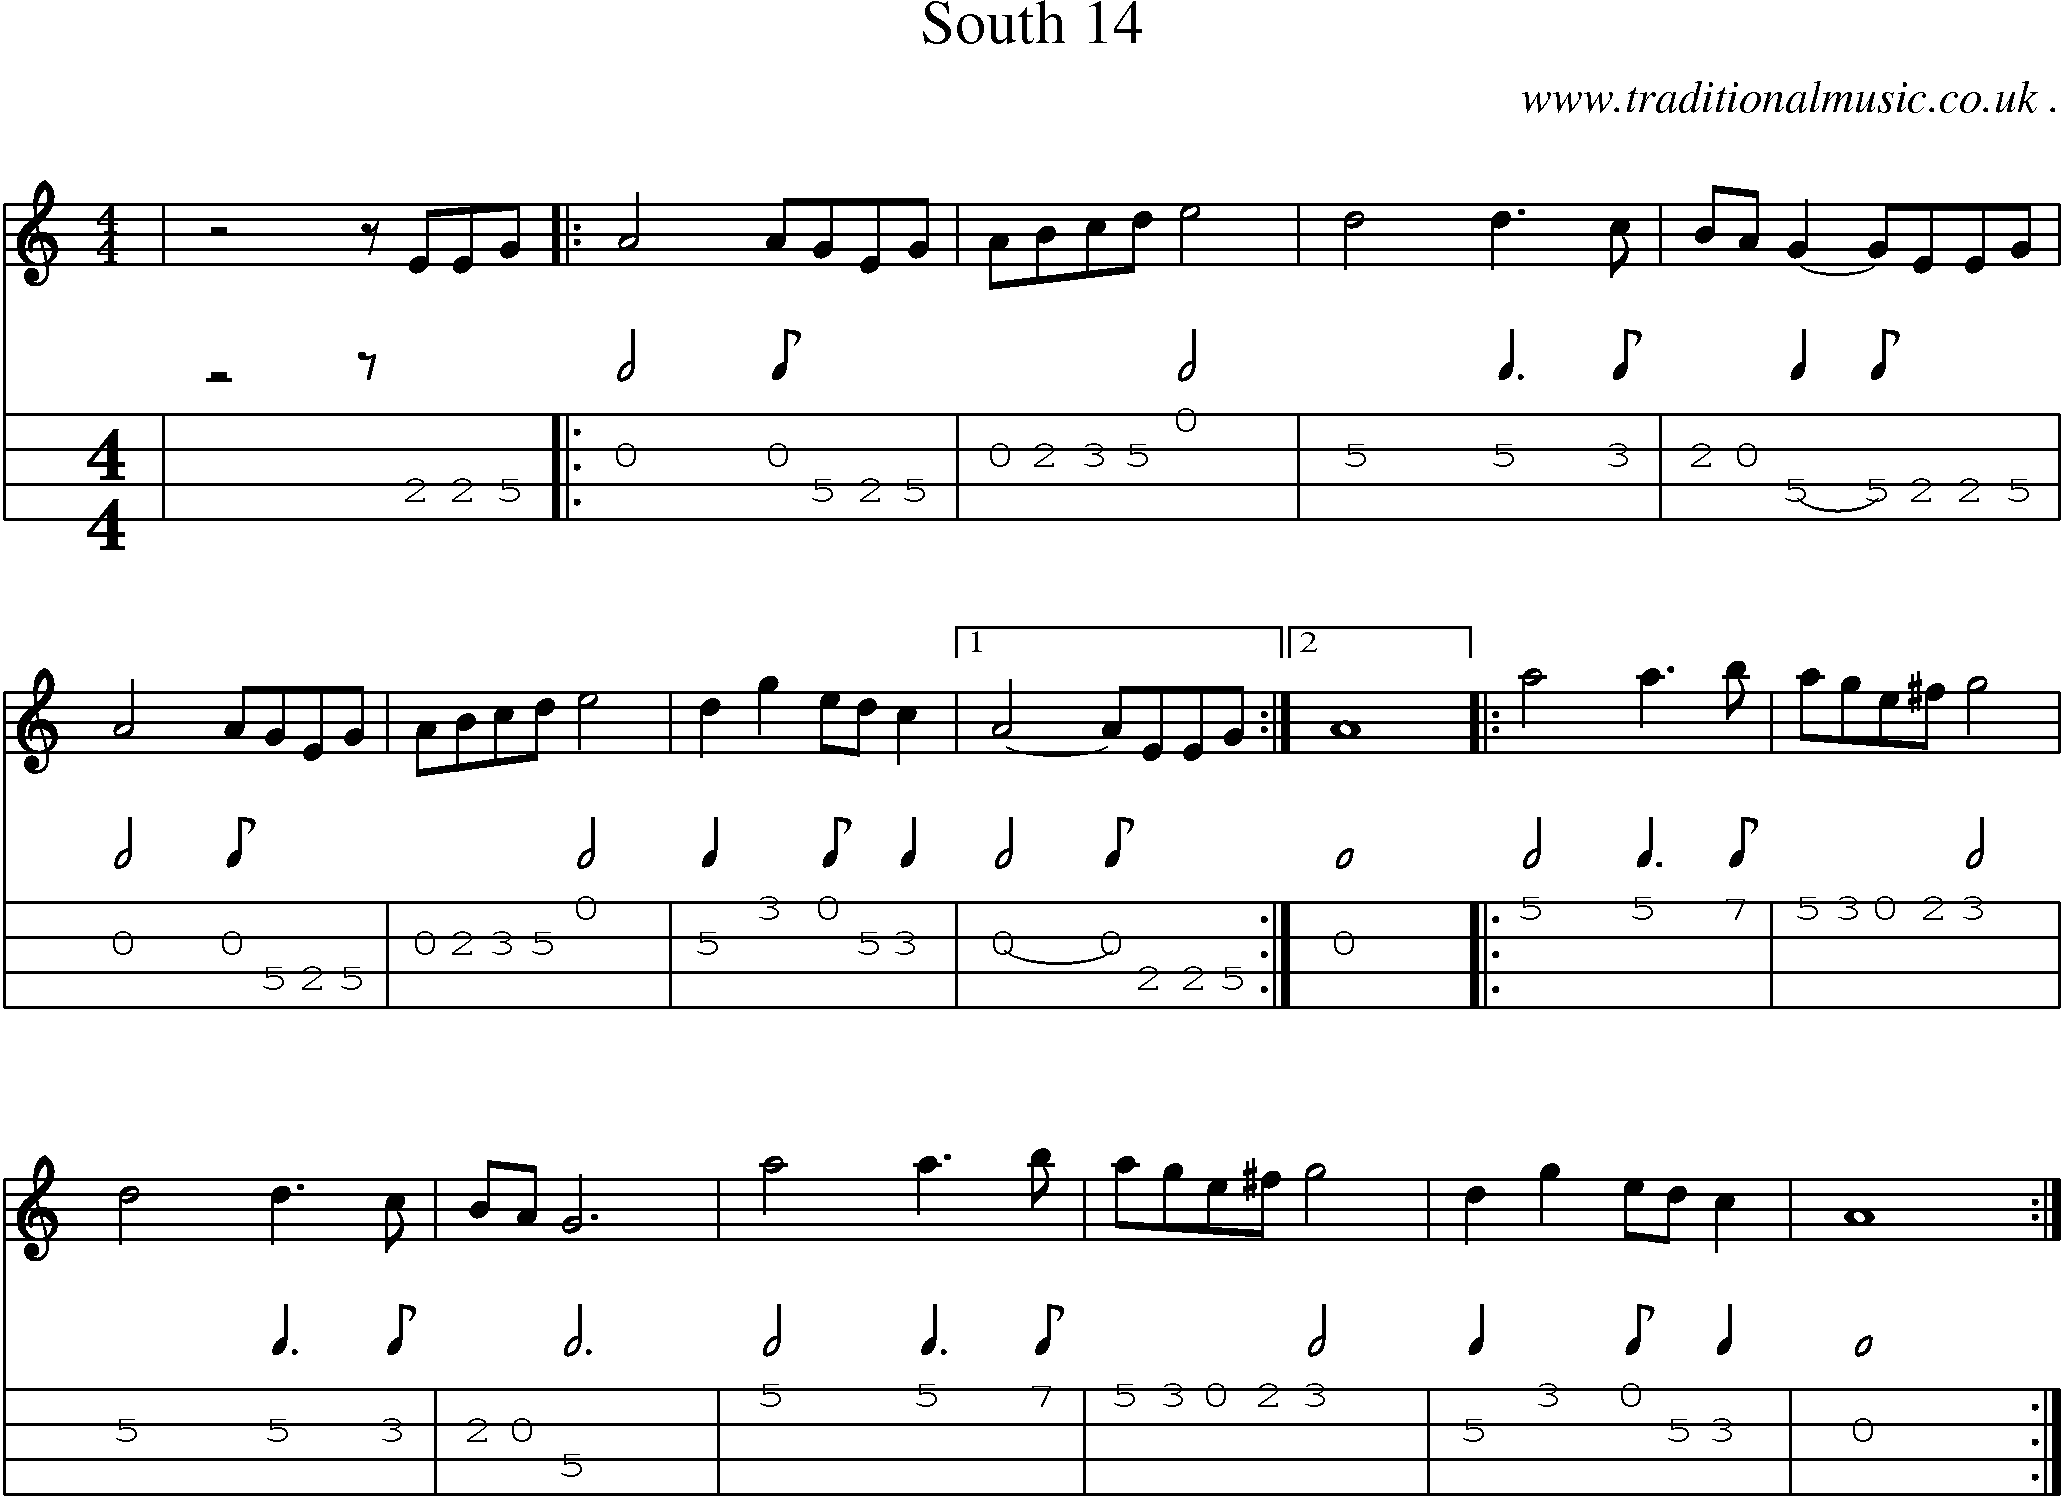 Music Score and Guitar Tabs for South 14